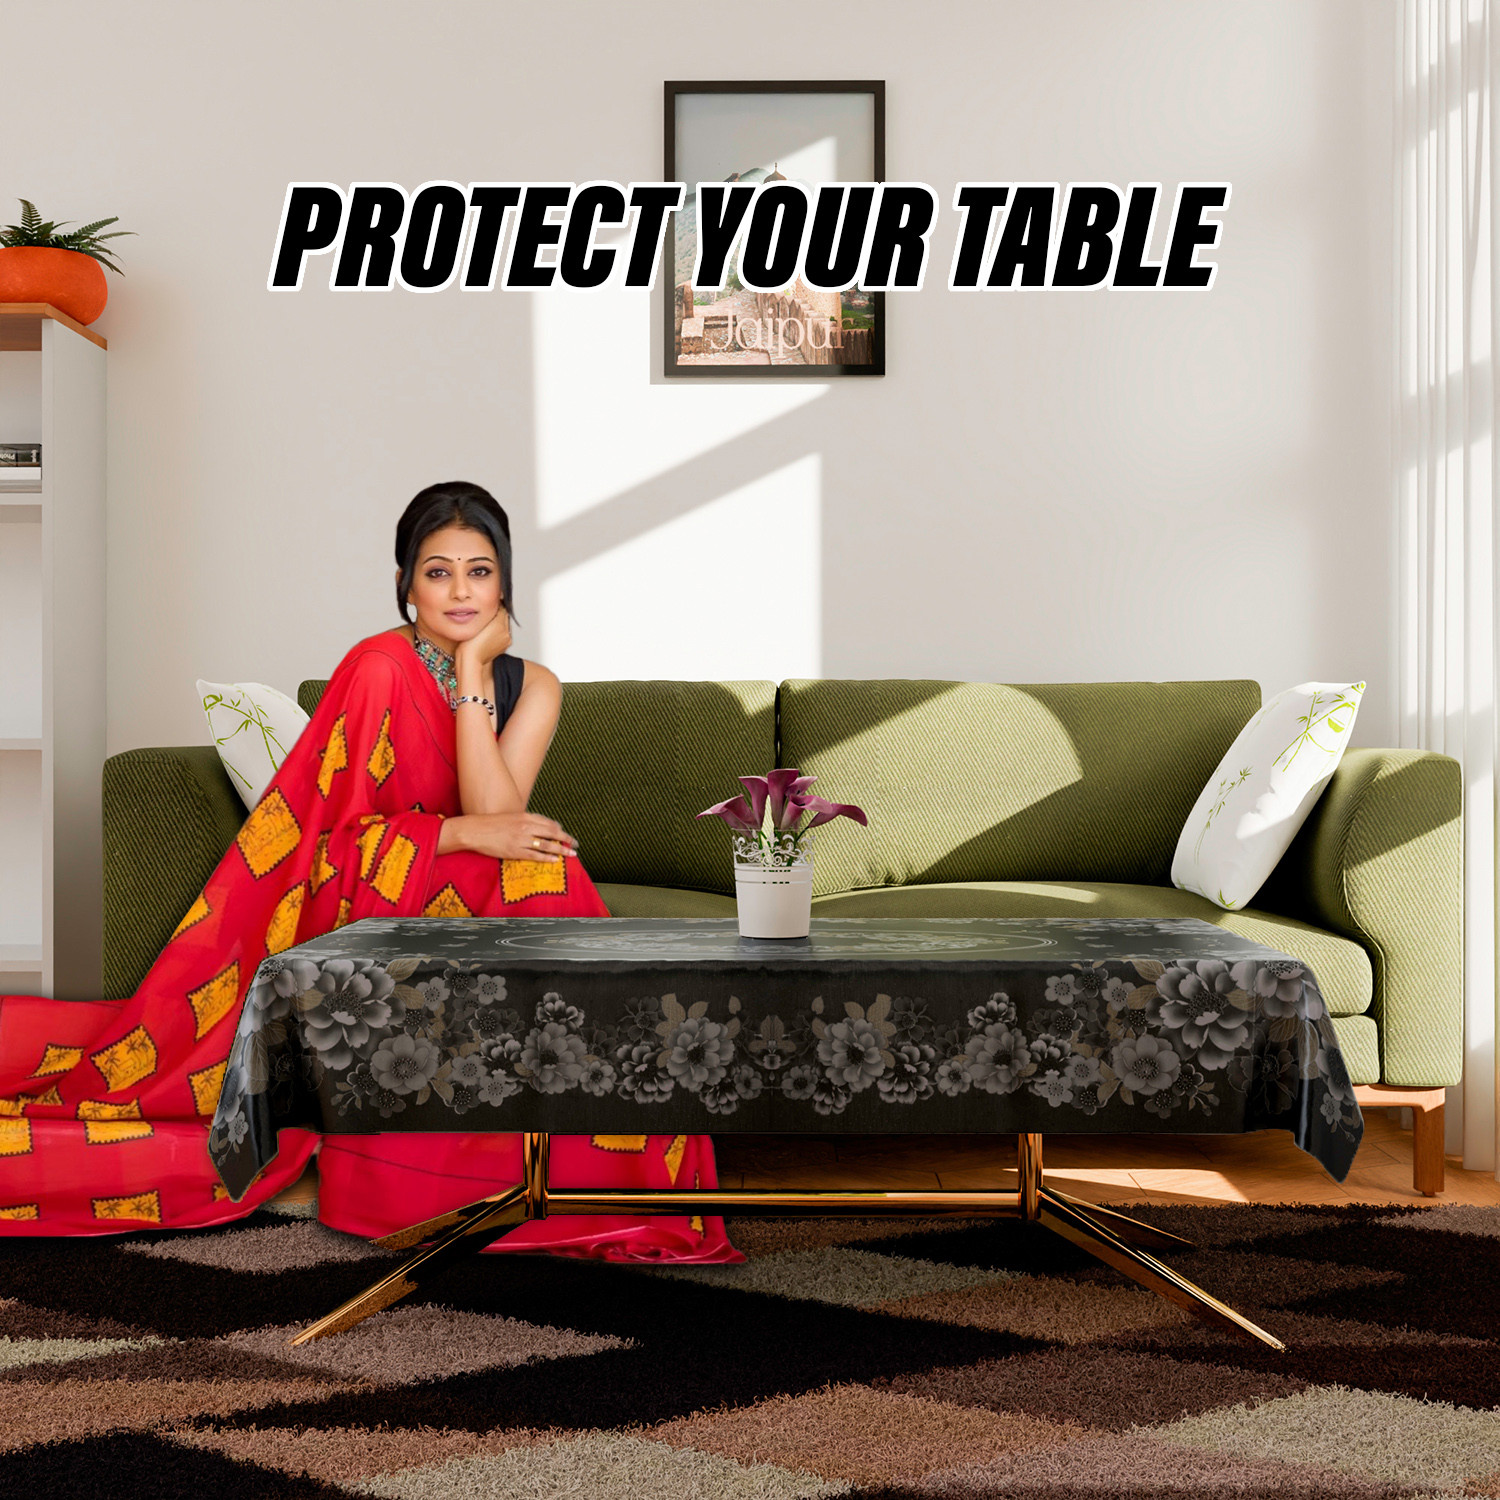 Kuber Industries Center Table Cover | Sigma PVC Flower Center Table Cover | Luxurious Table Protector Cover Without Lace | 40x60 Inch | Black